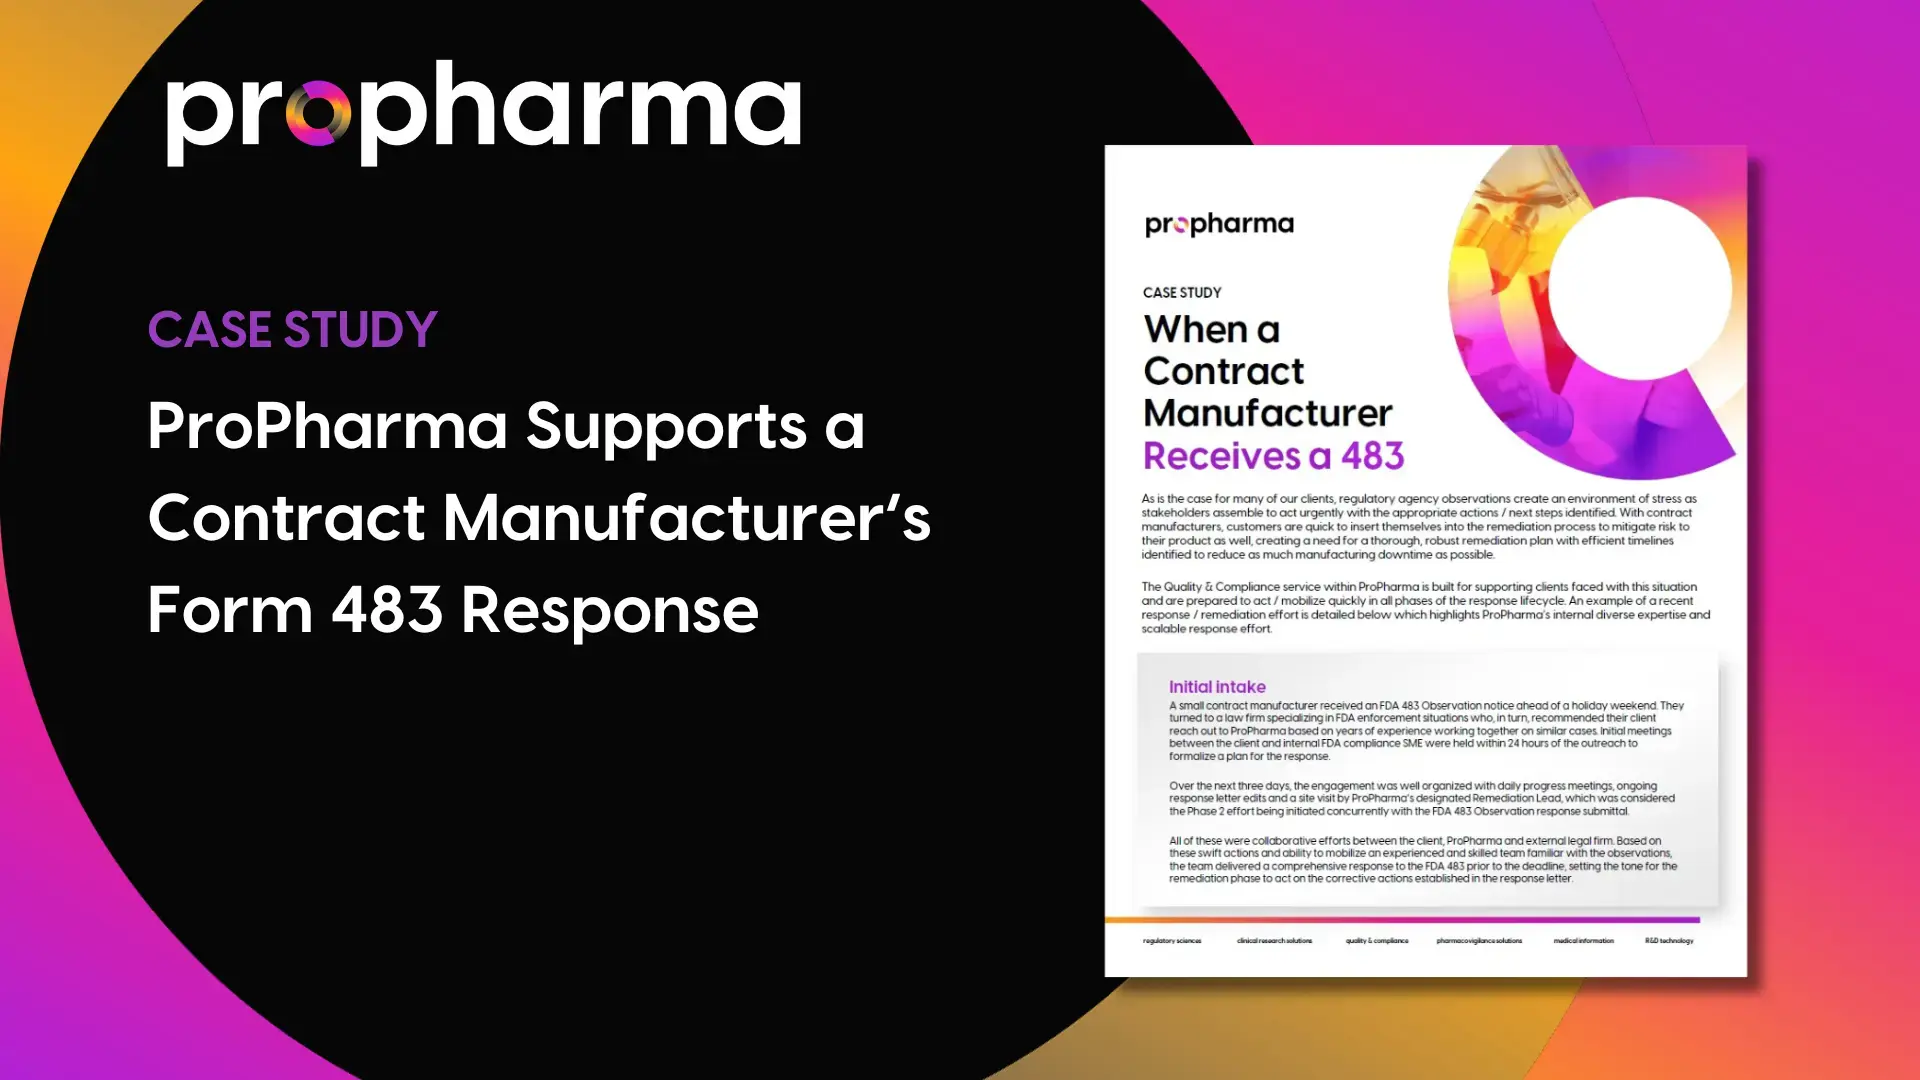 ProPharma Supports a Contract Manufacturer's Form 483 Response Image